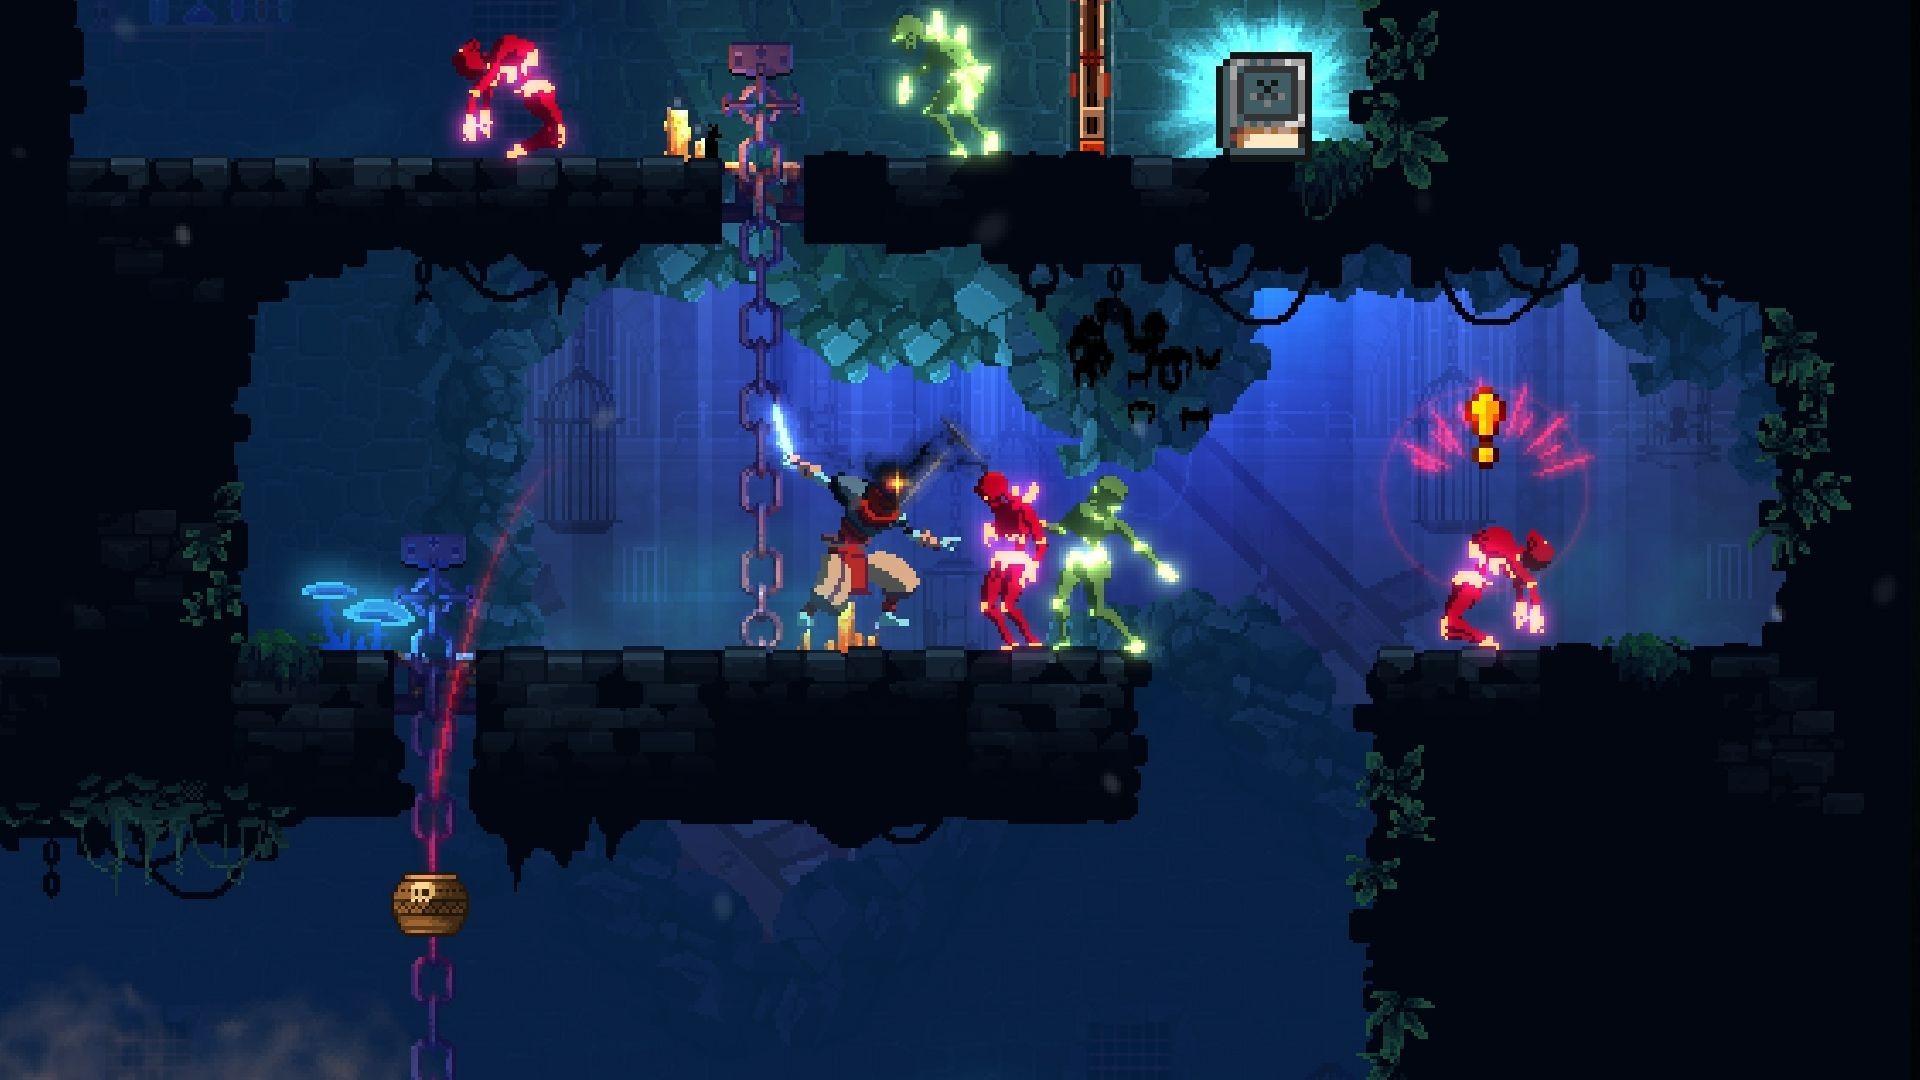 Dead Cells Action Game of the Year